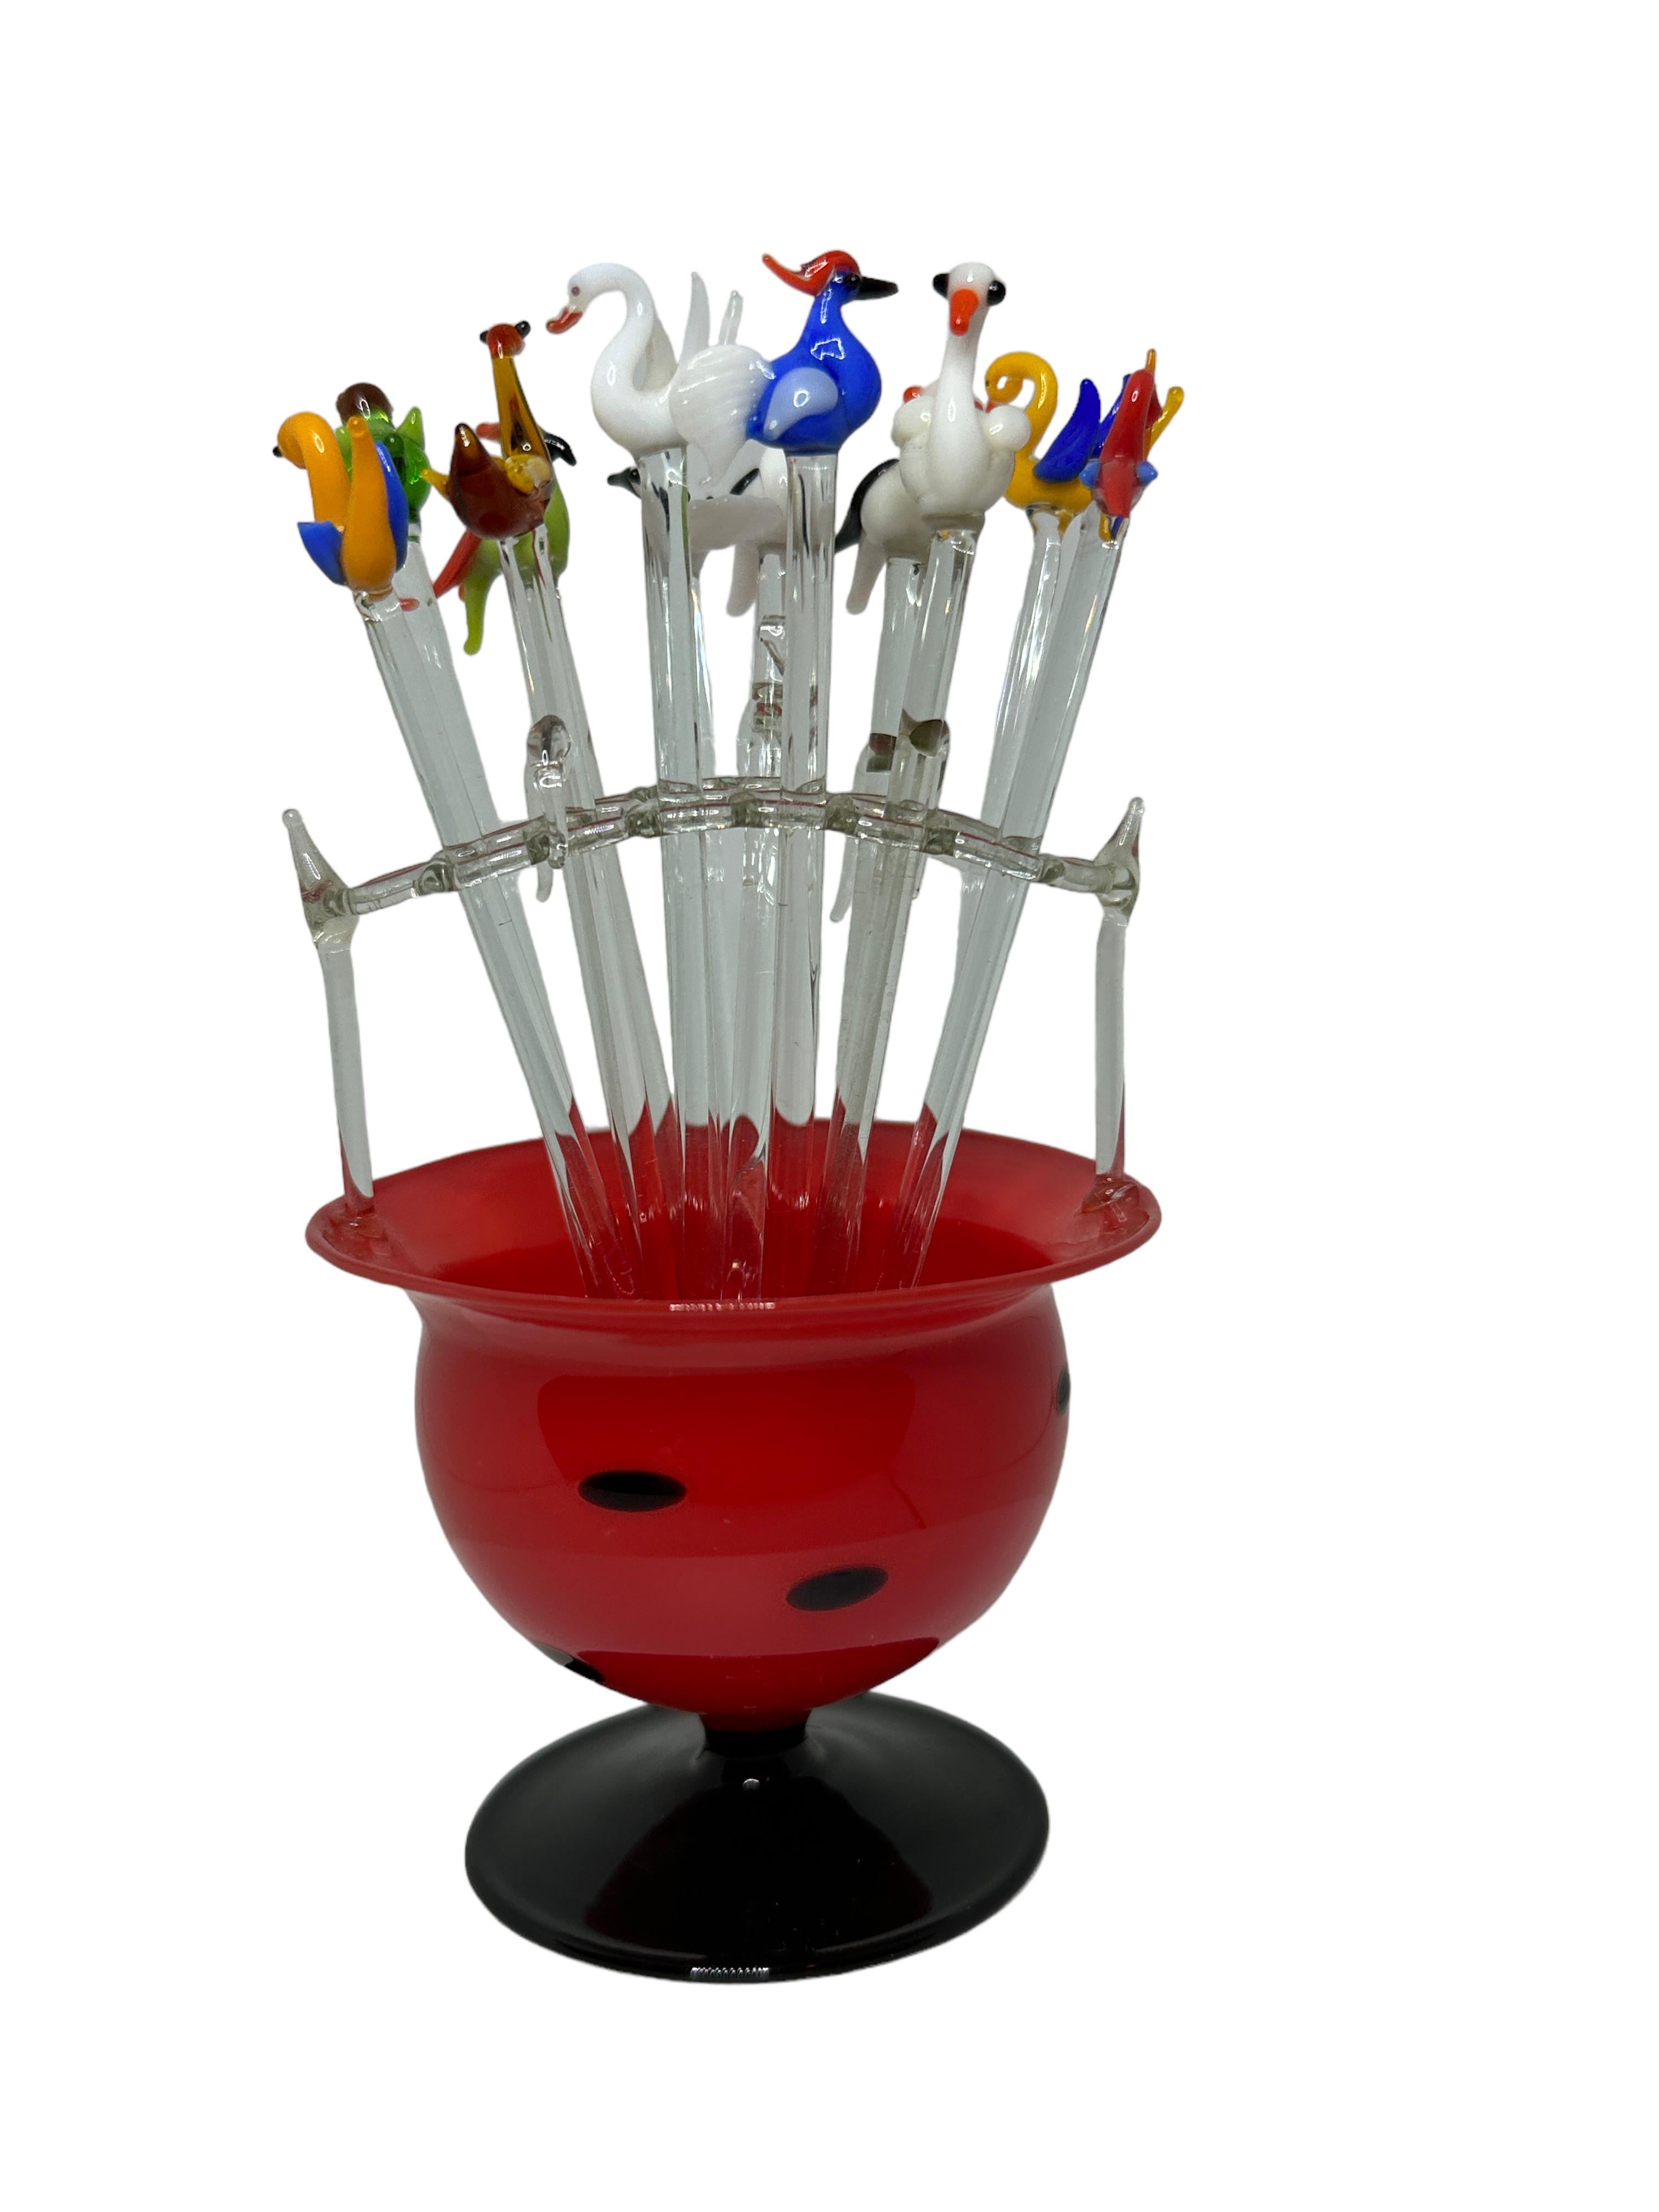 Hand-Crafted Bimini Glass Cocktail Picks with Red Bowl Stand, 1920s, Vienna Austria For Sale